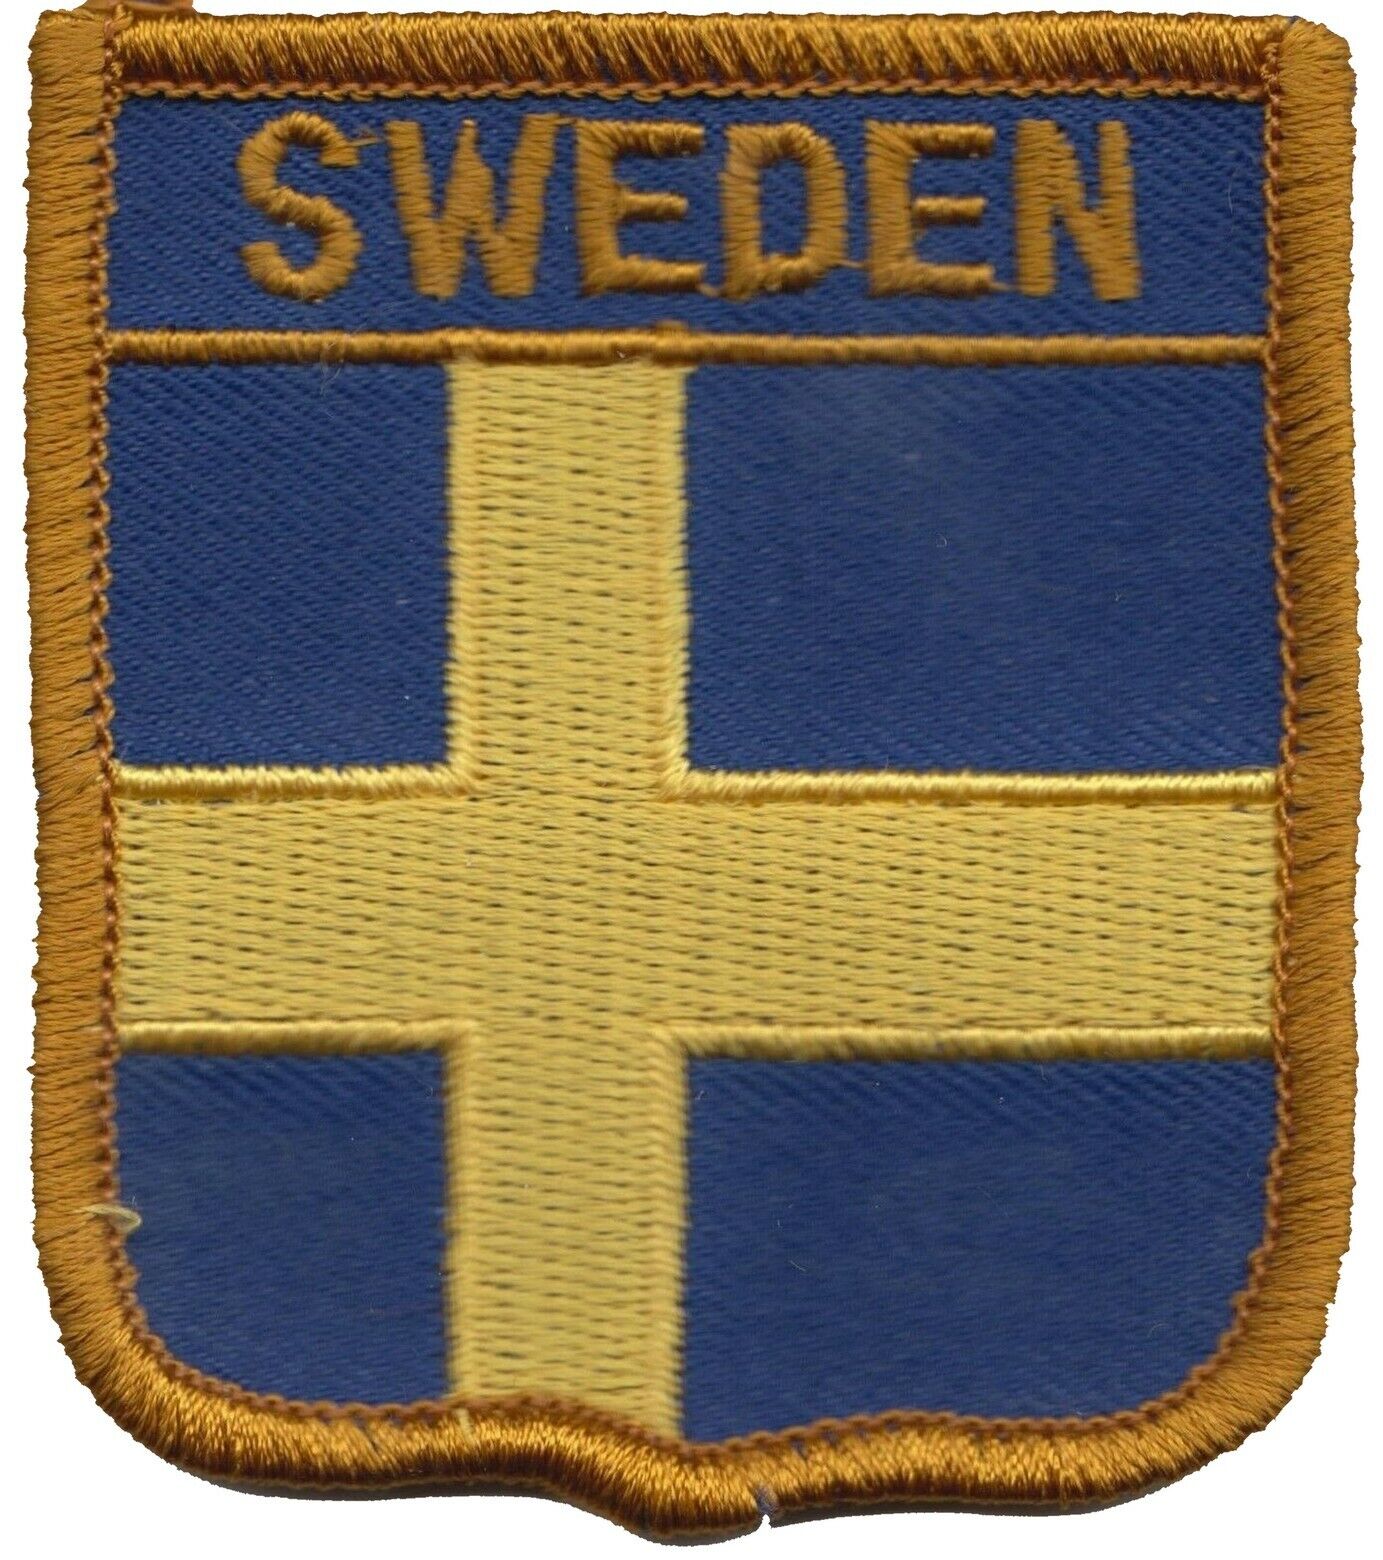 Sweden Flag Embroidered Patch